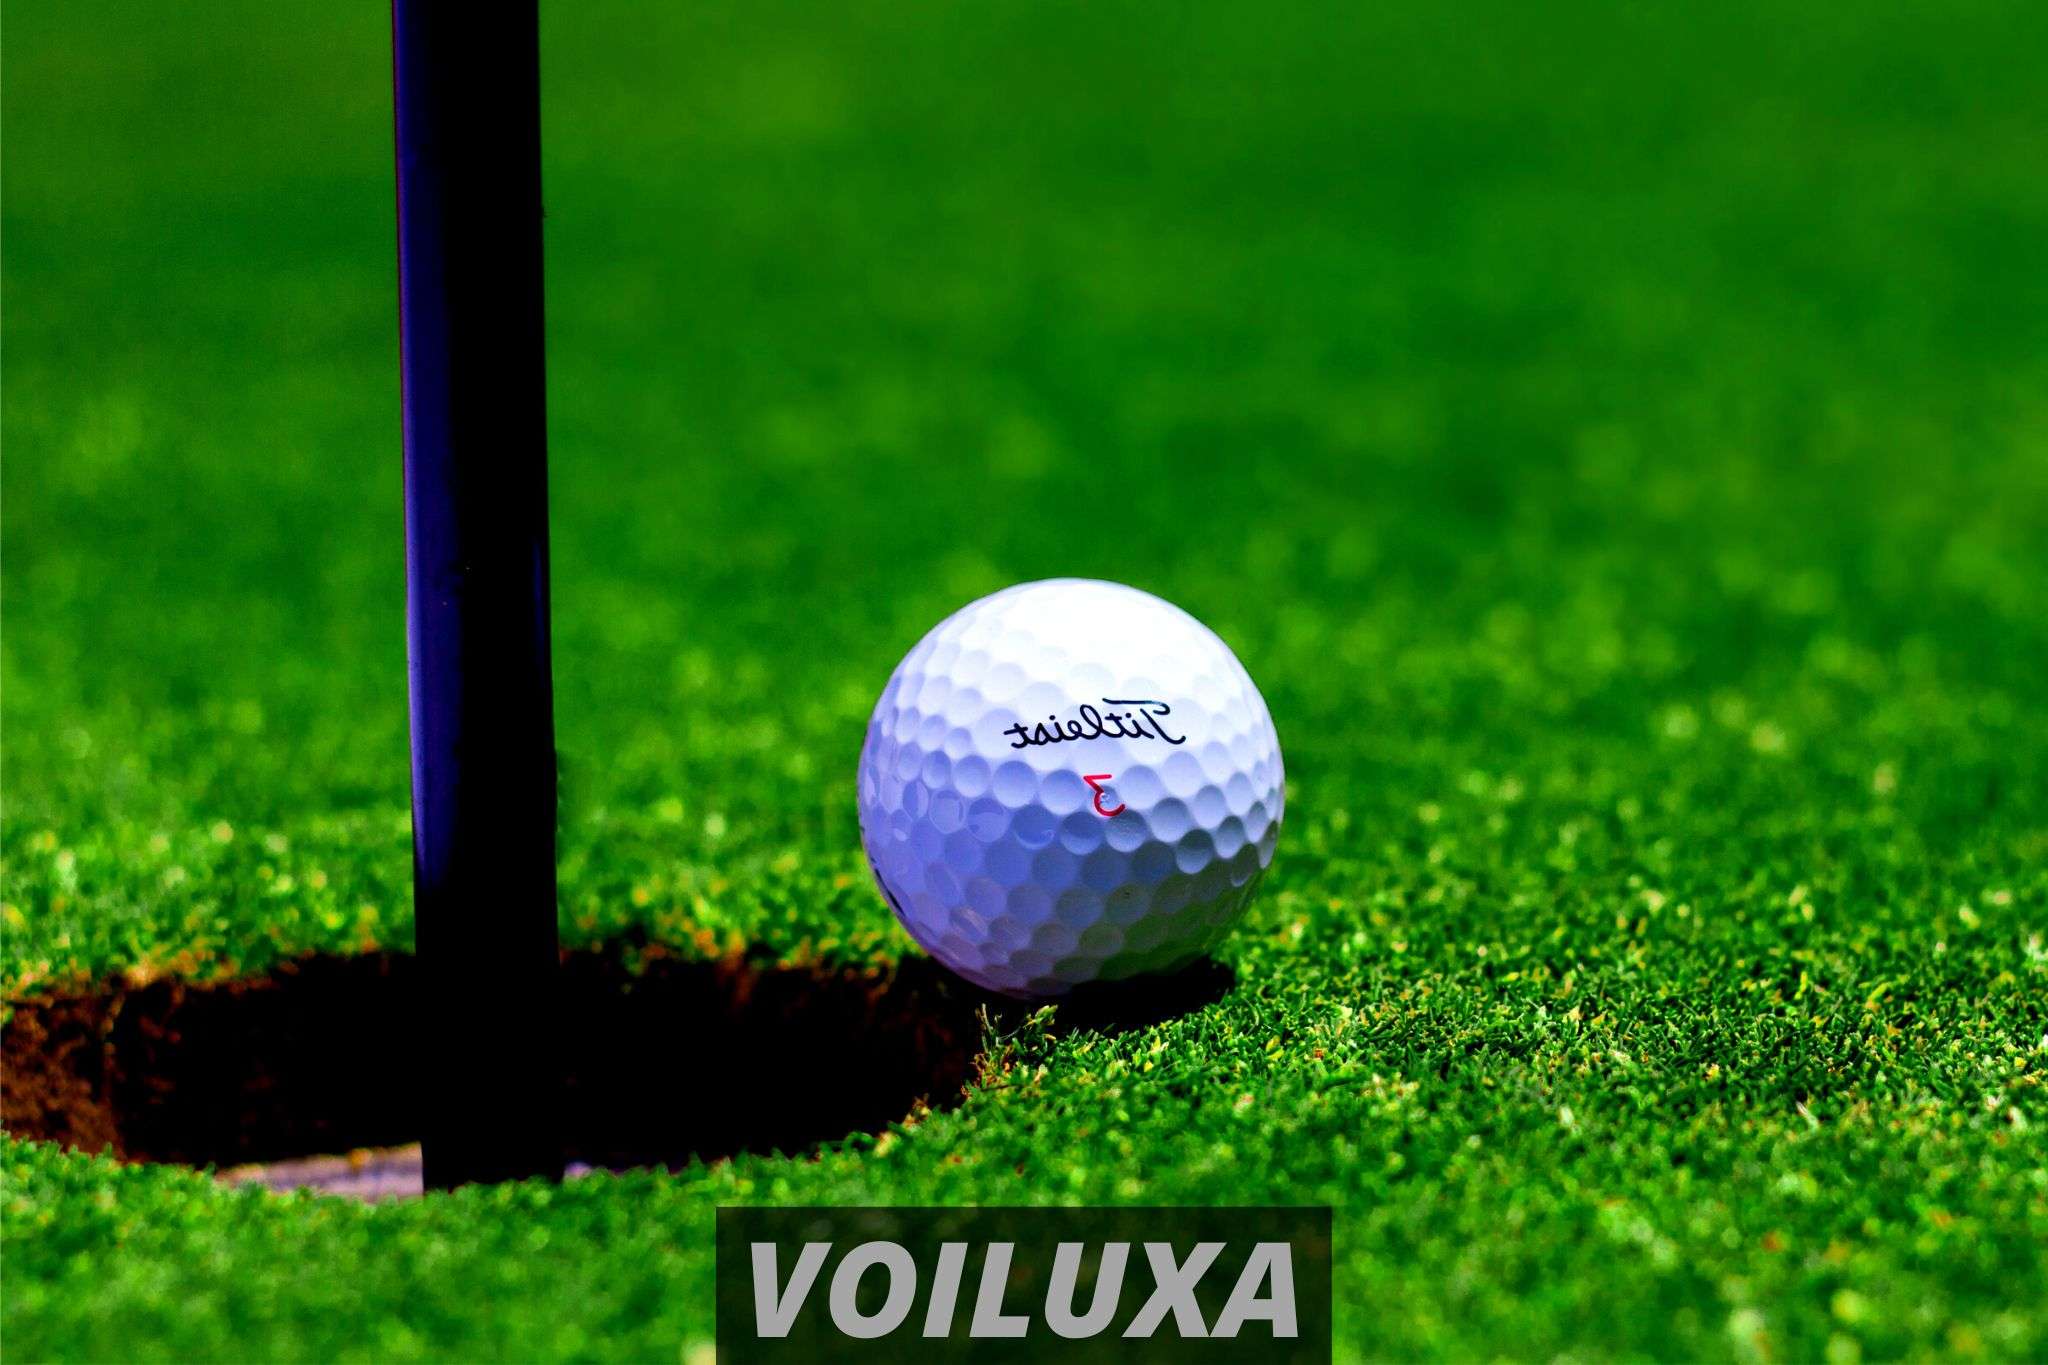 Most Expensive Golf Balls – Do They Make a Difference?